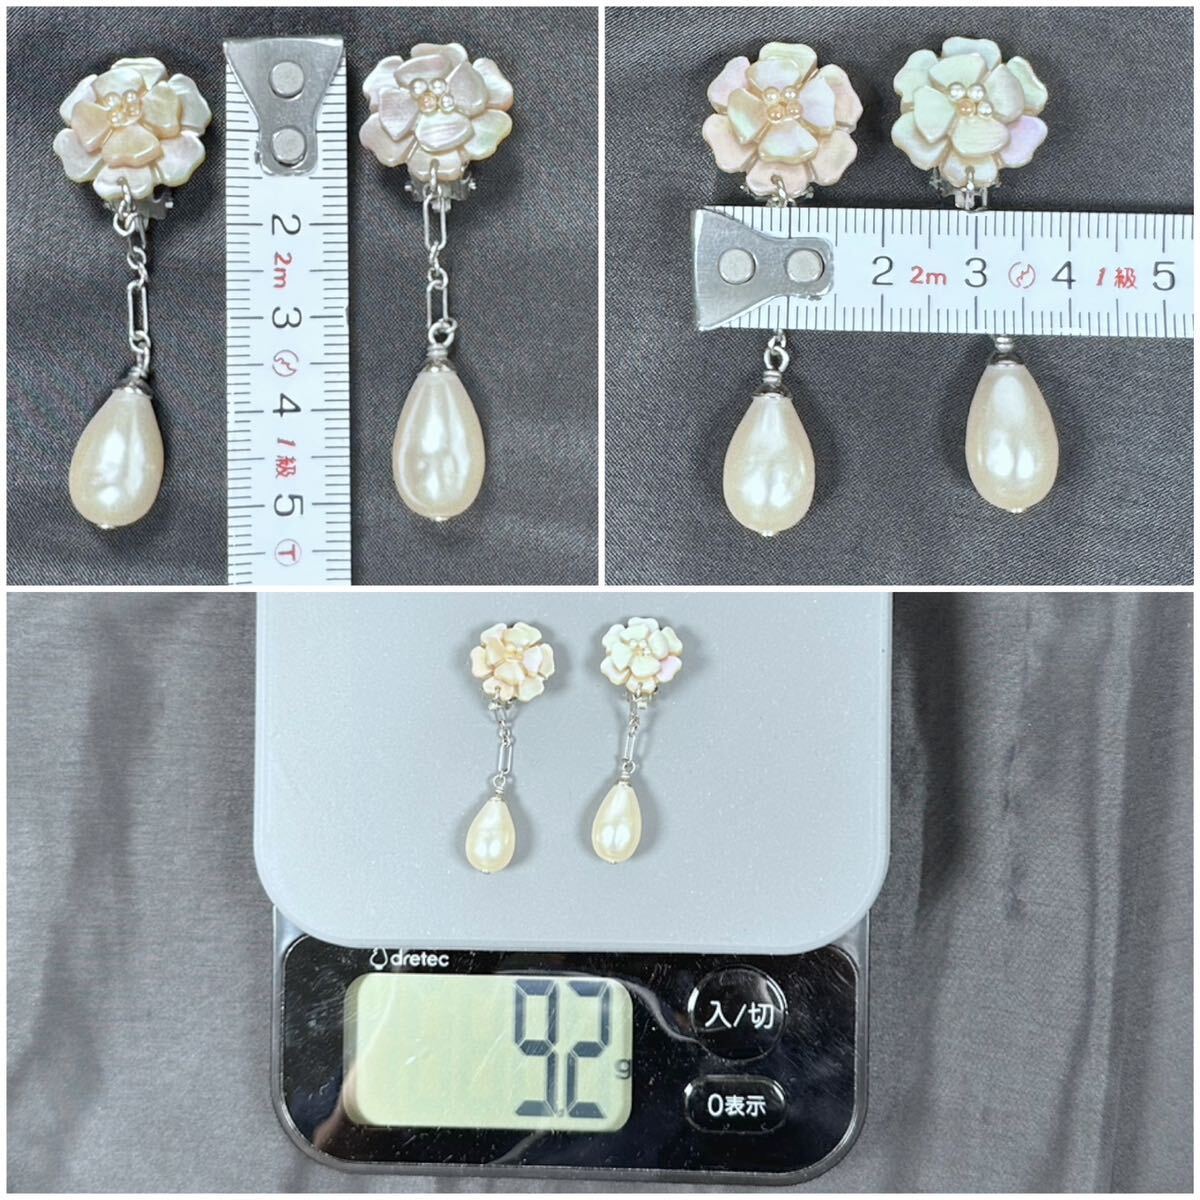 1 jpy ~ * Chanel CHANEL earrings 98A / flower shell / Vintage lady's accessory silver group / box attaching [ genuine article guarantee ]